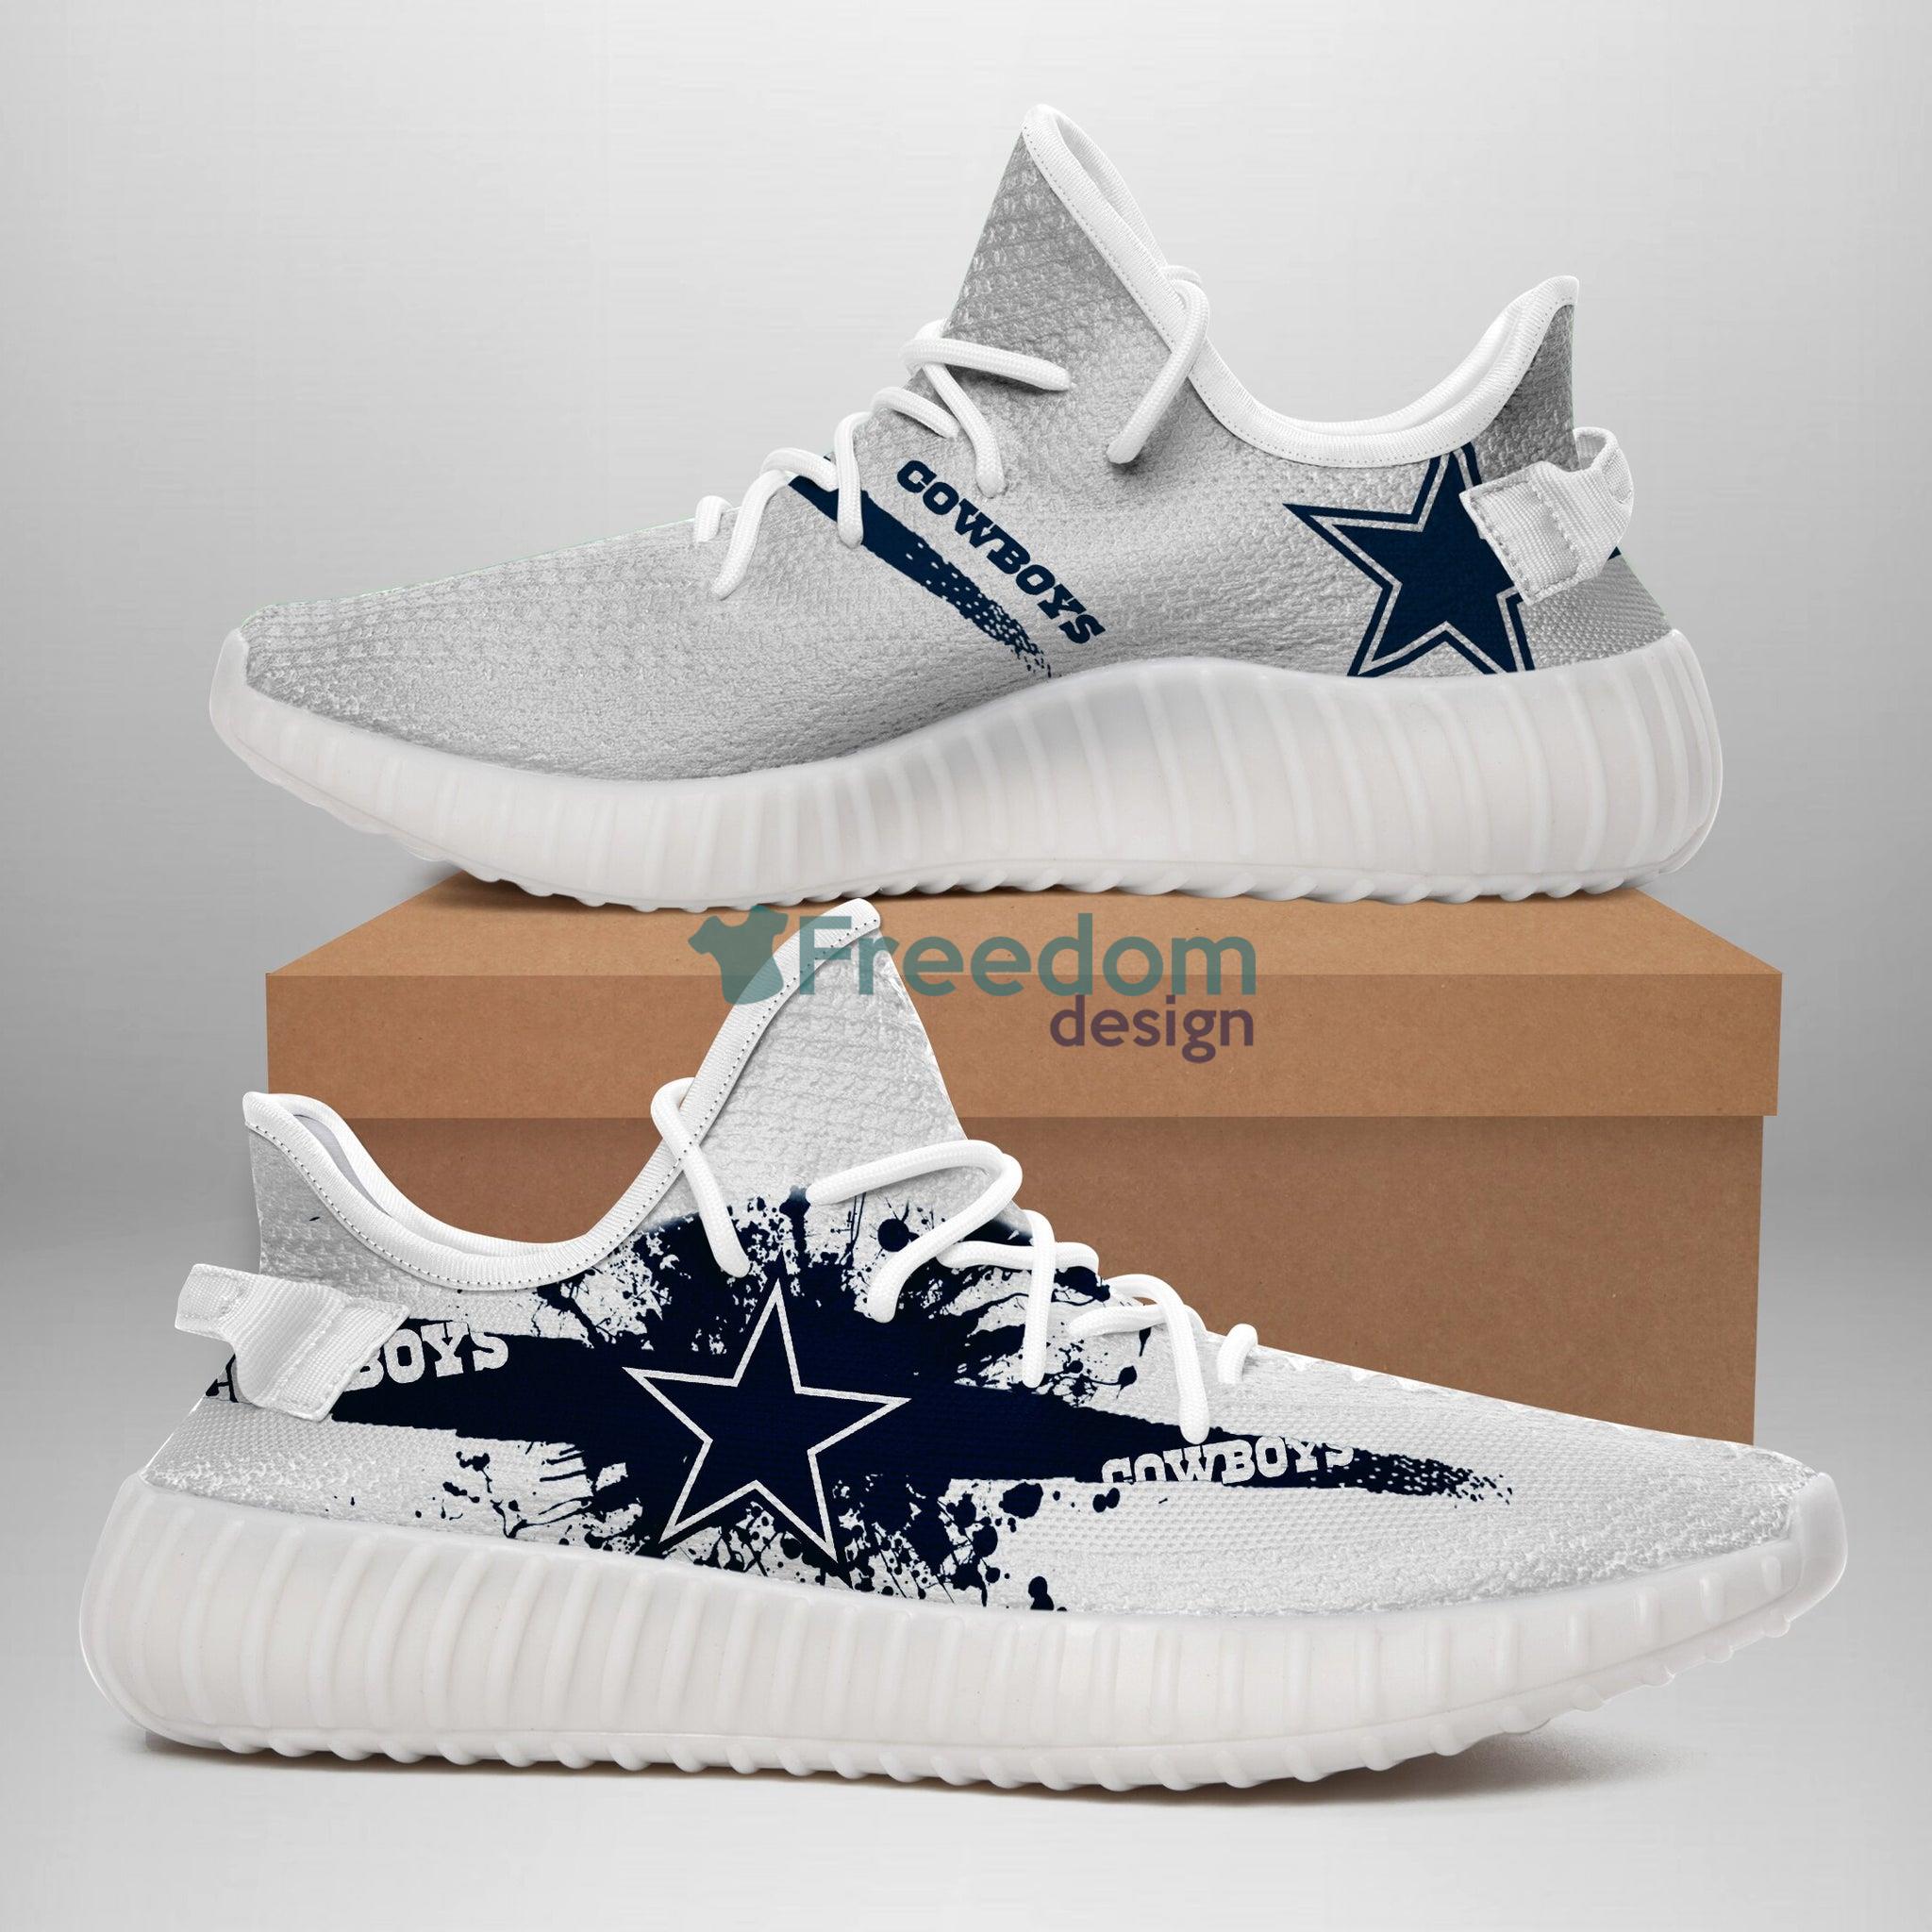 Dallas Cowboys Lover Yeezy Shoes For Fans Product Photo 1